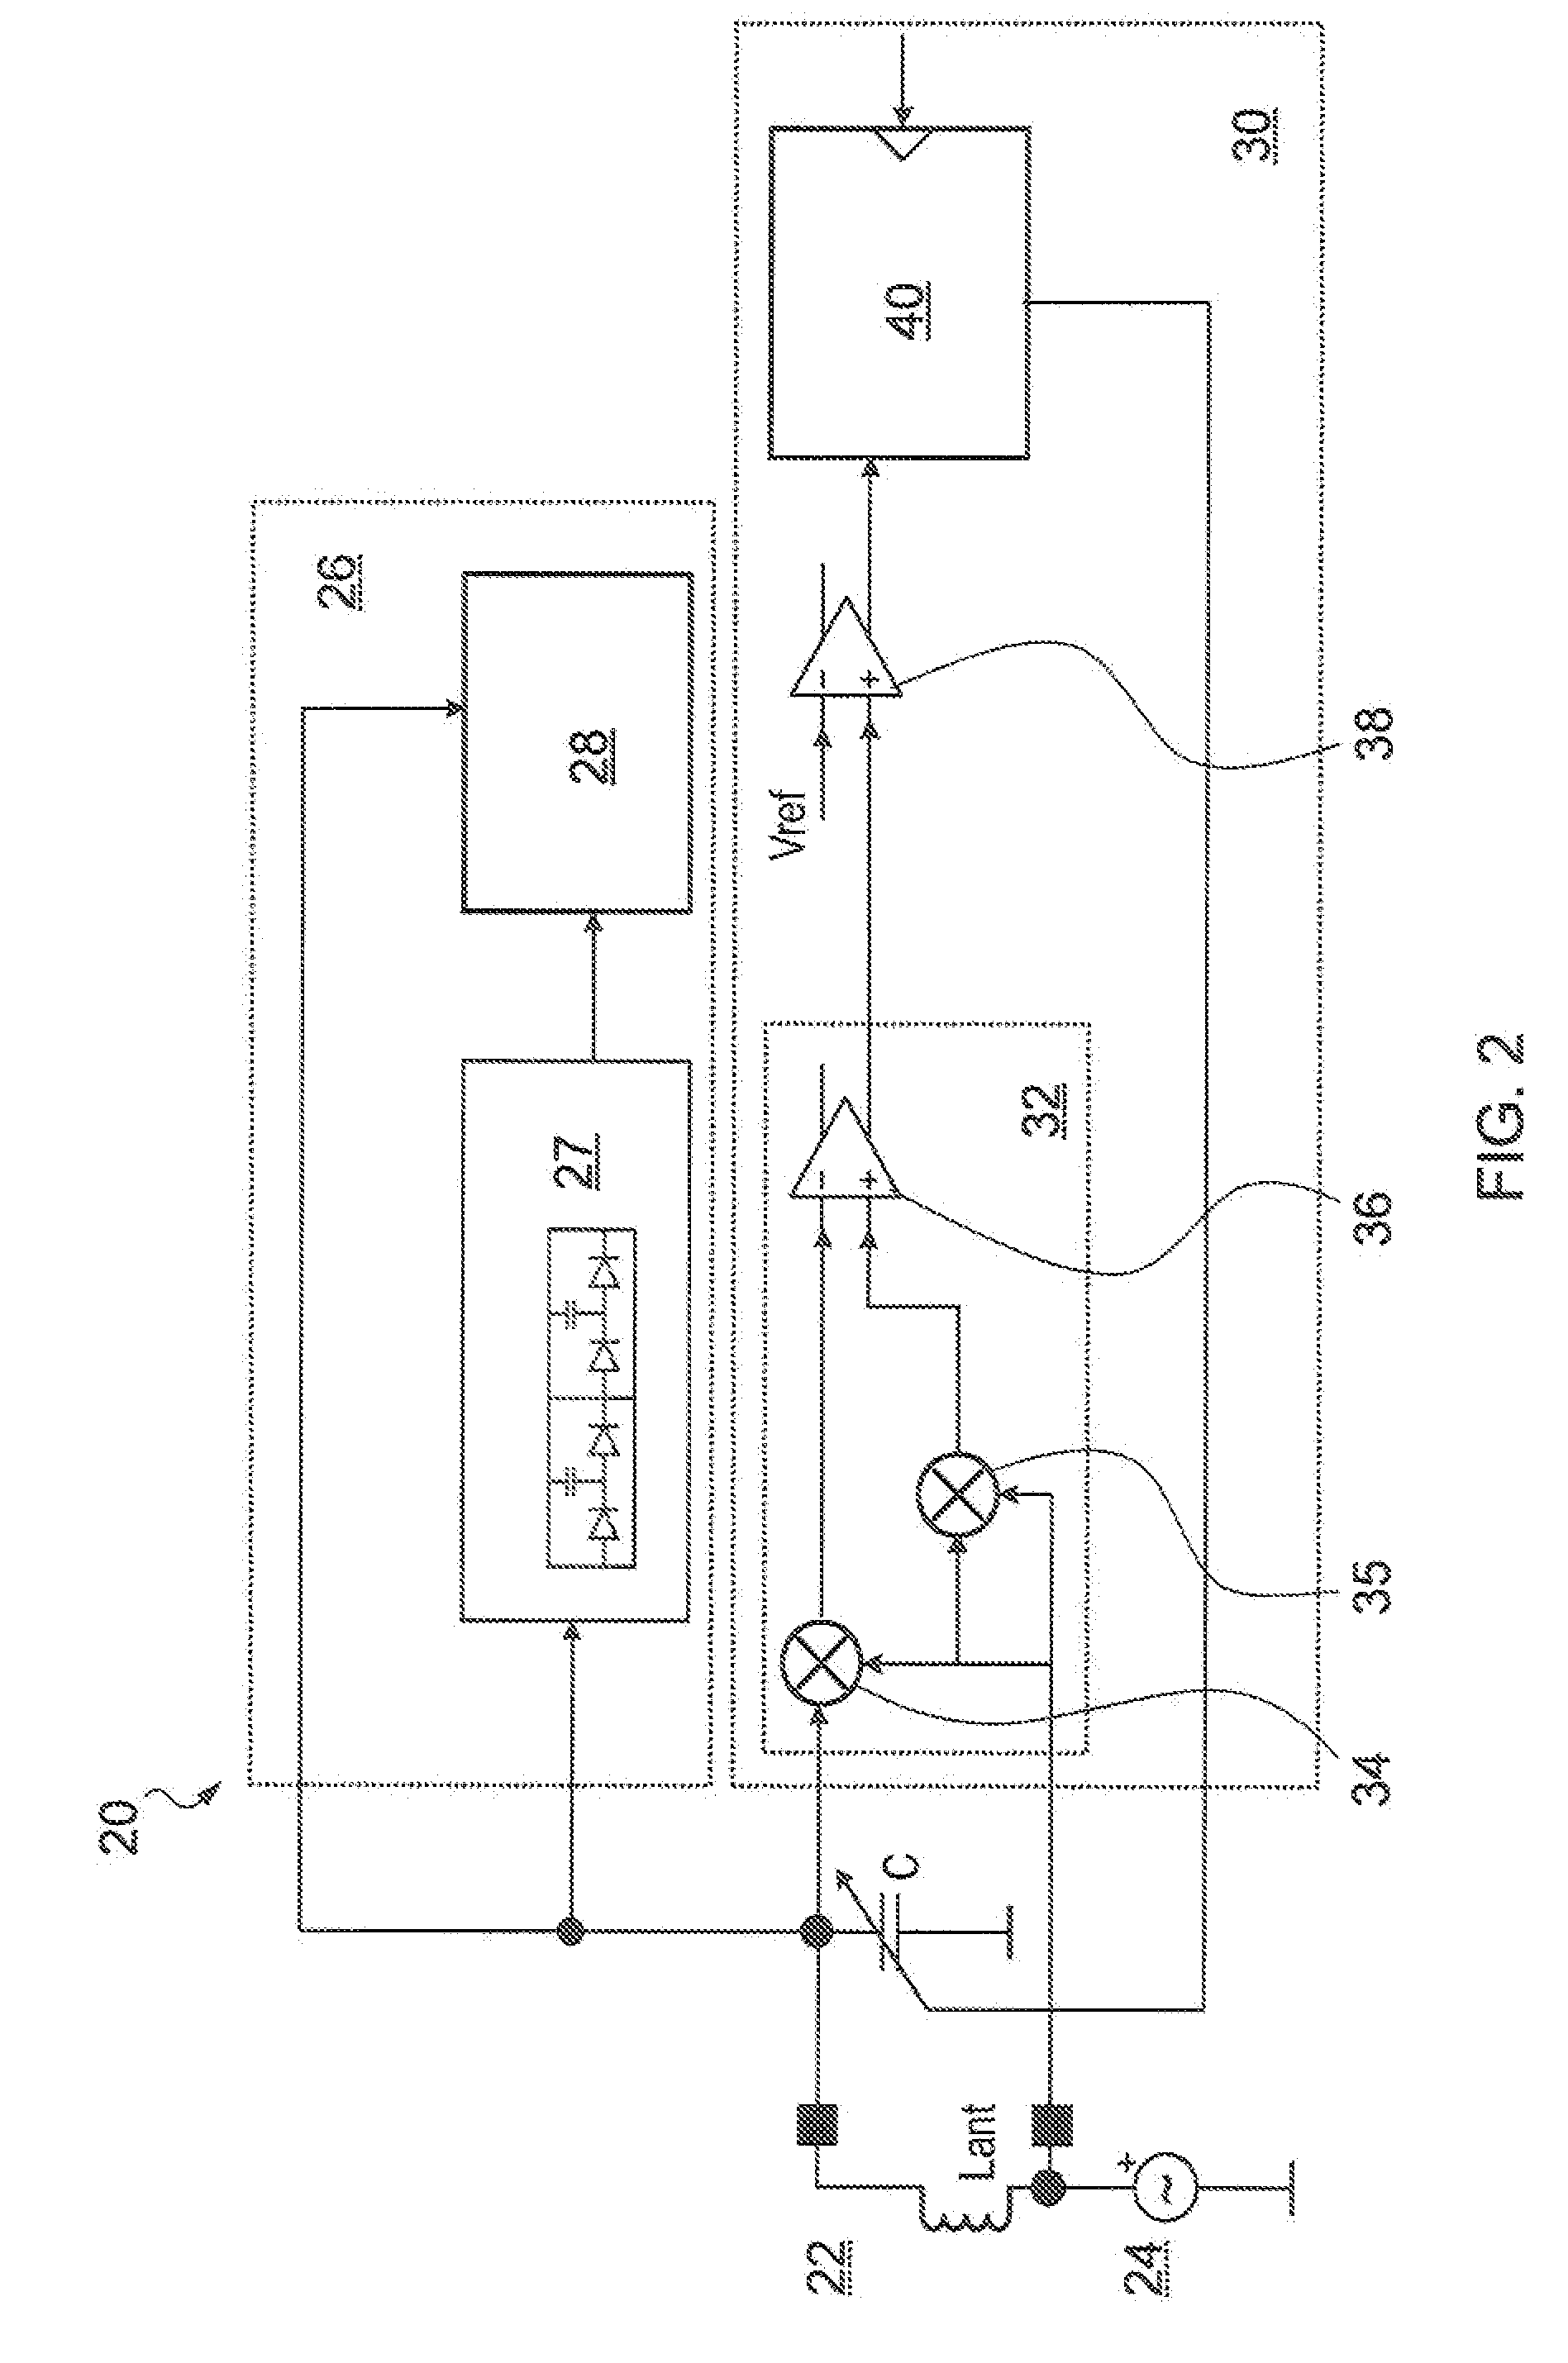 Non-contact communication device and method of operating the same